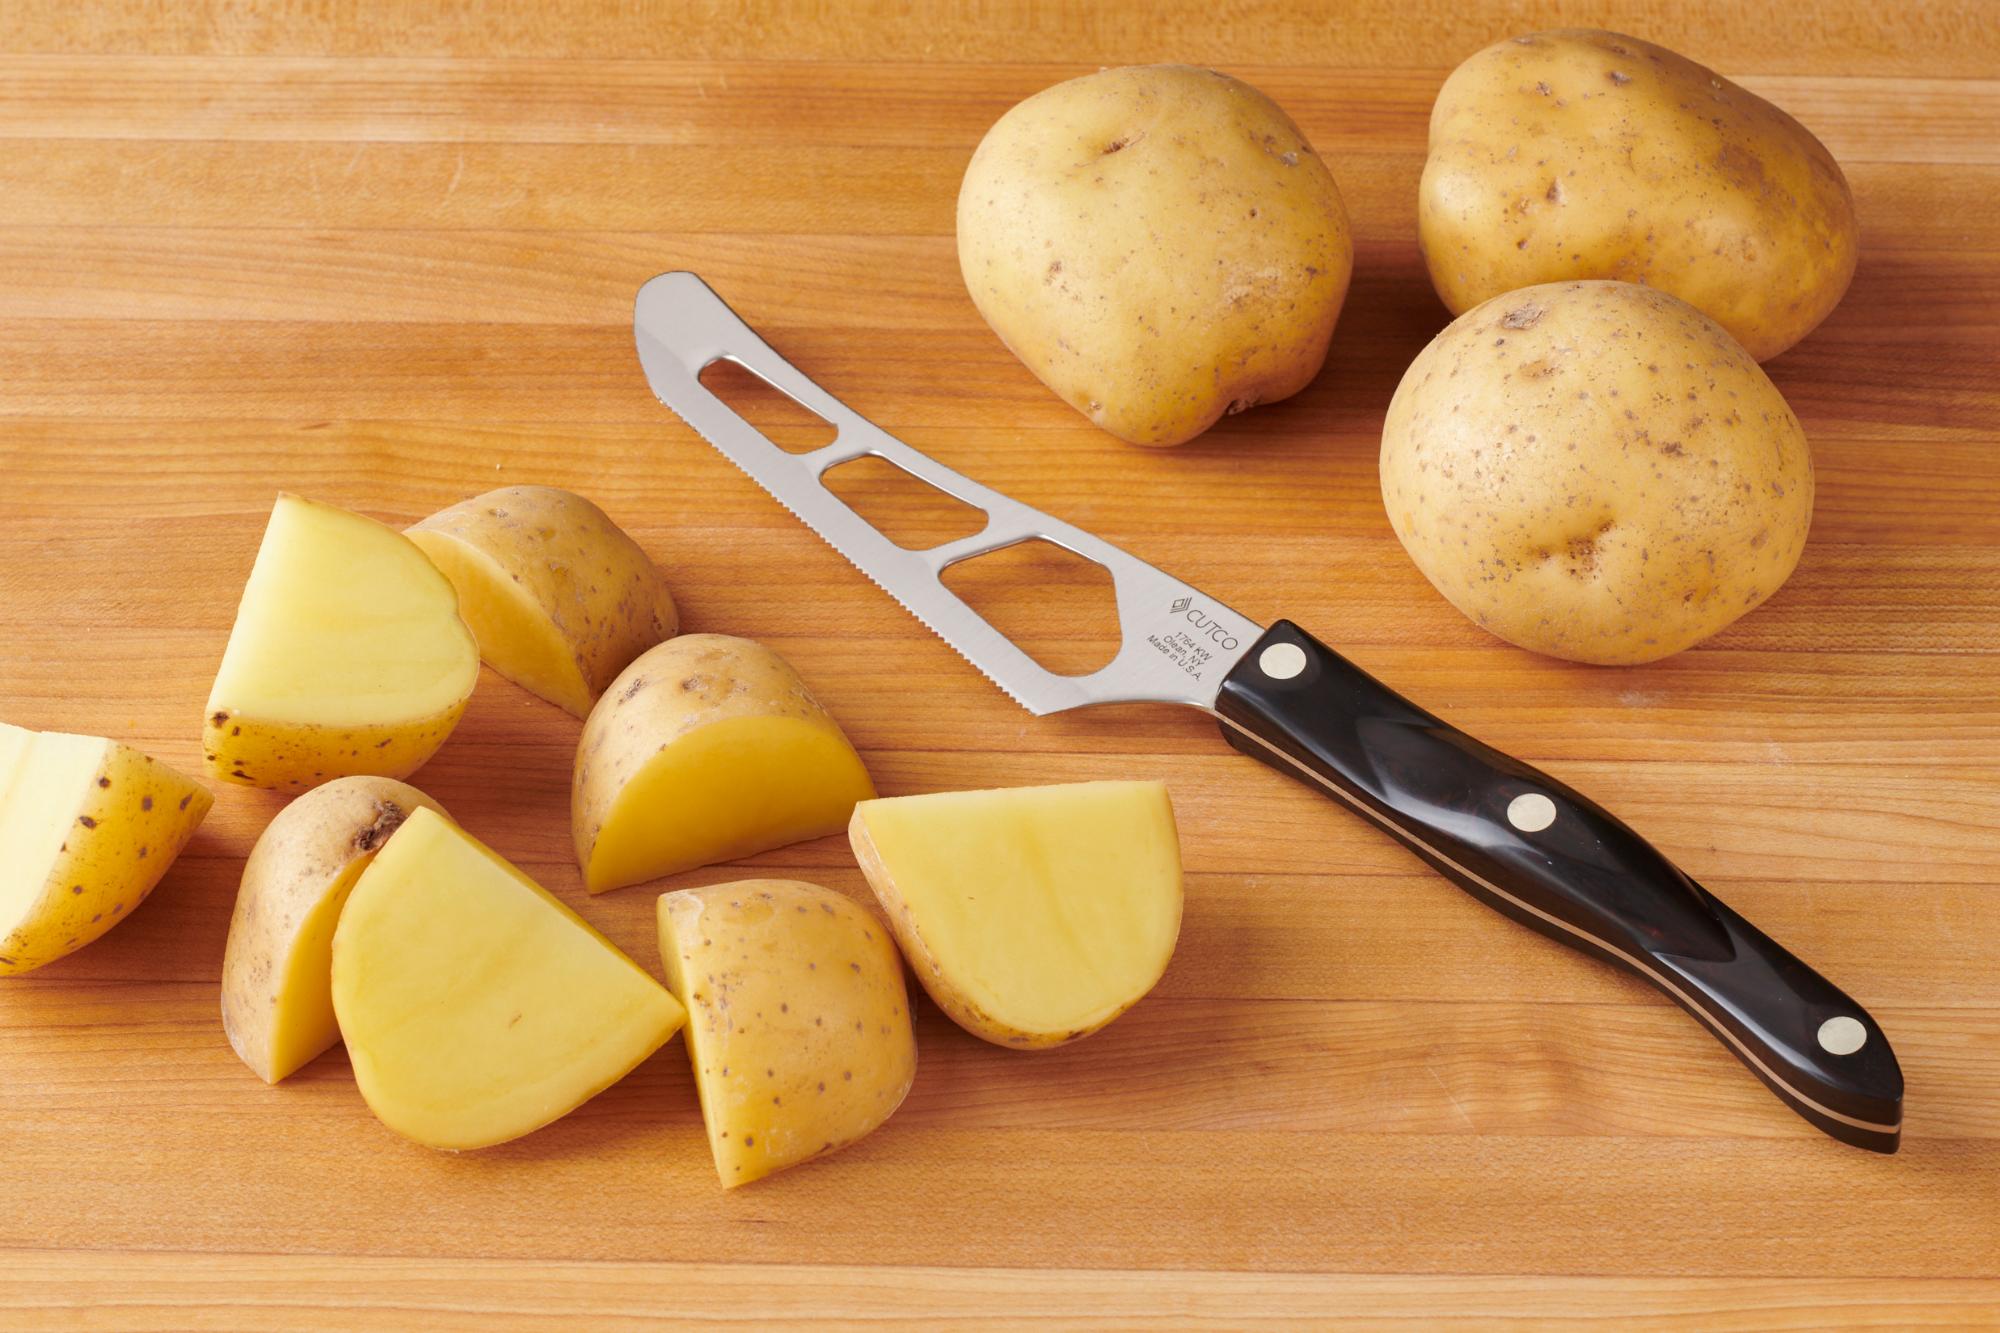 Quartered potatoes with a Traditional Cheese Knife.